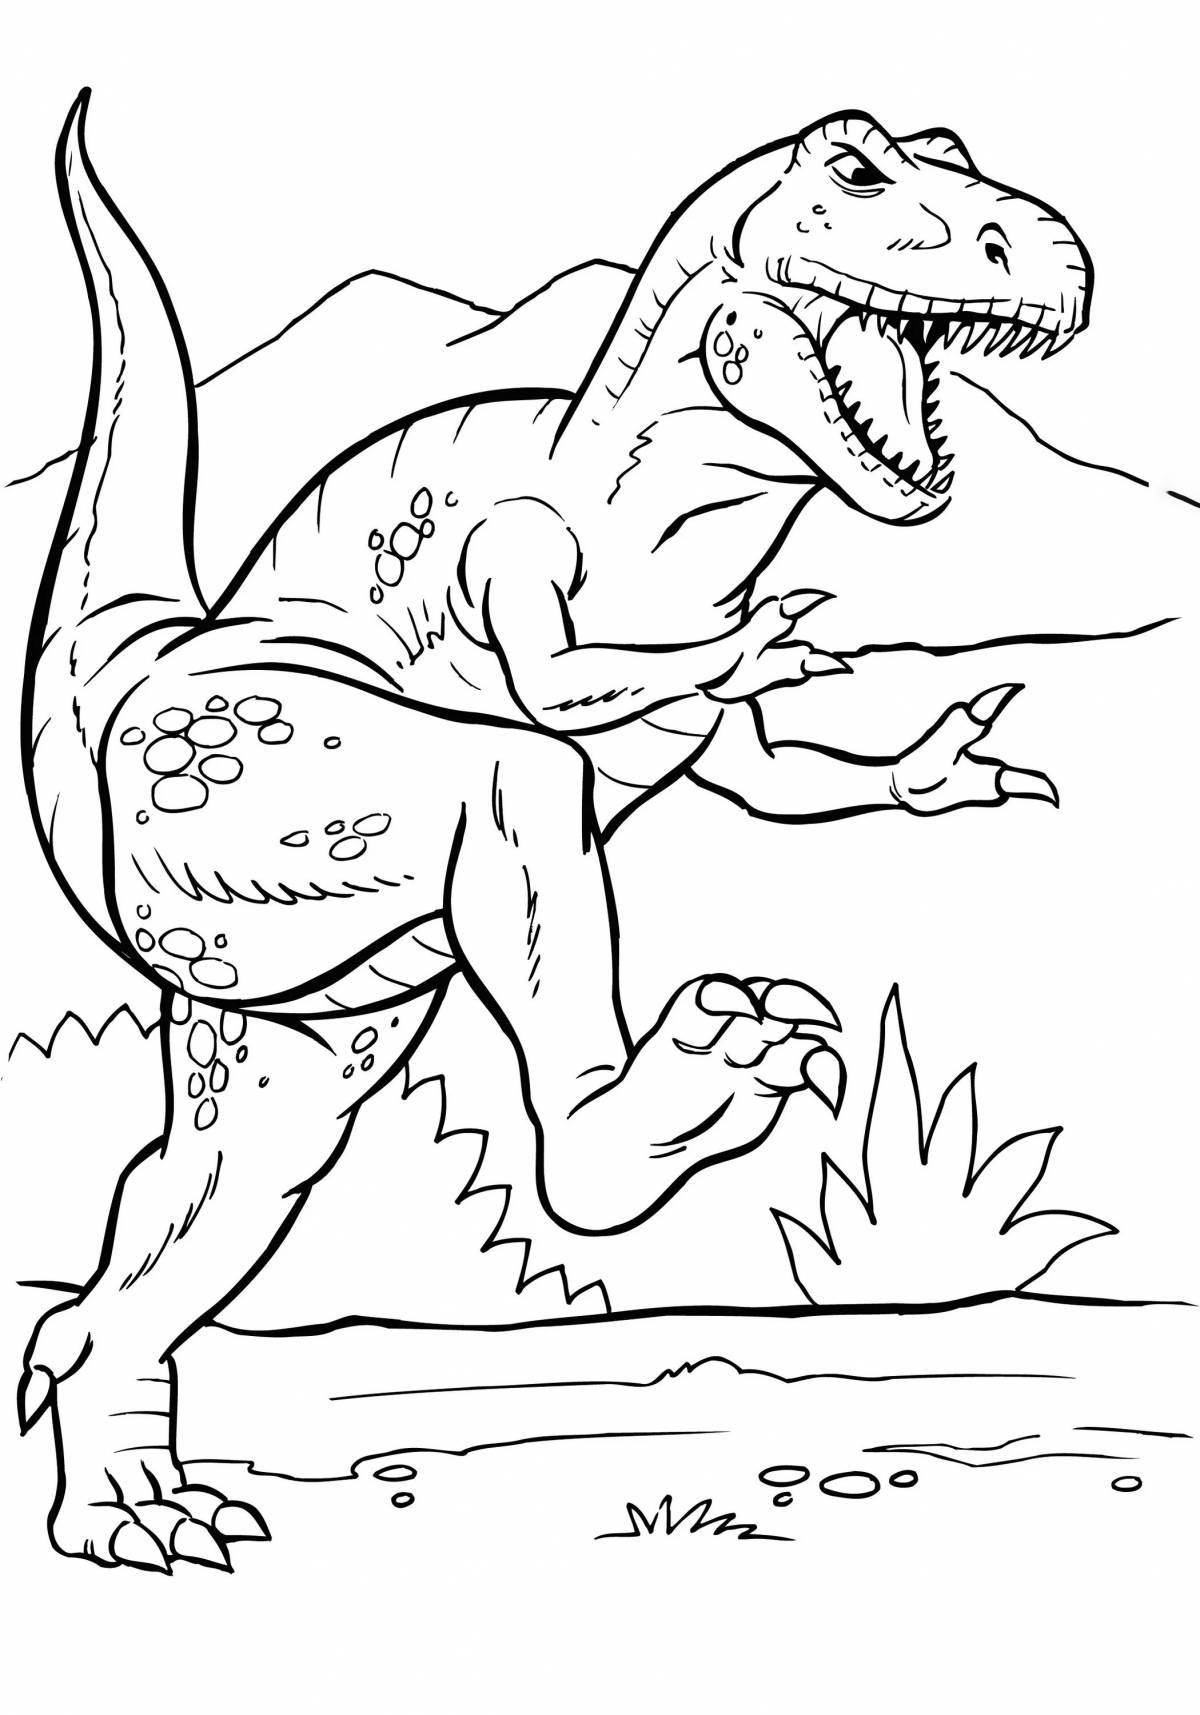 Dazzling tirex coloring page